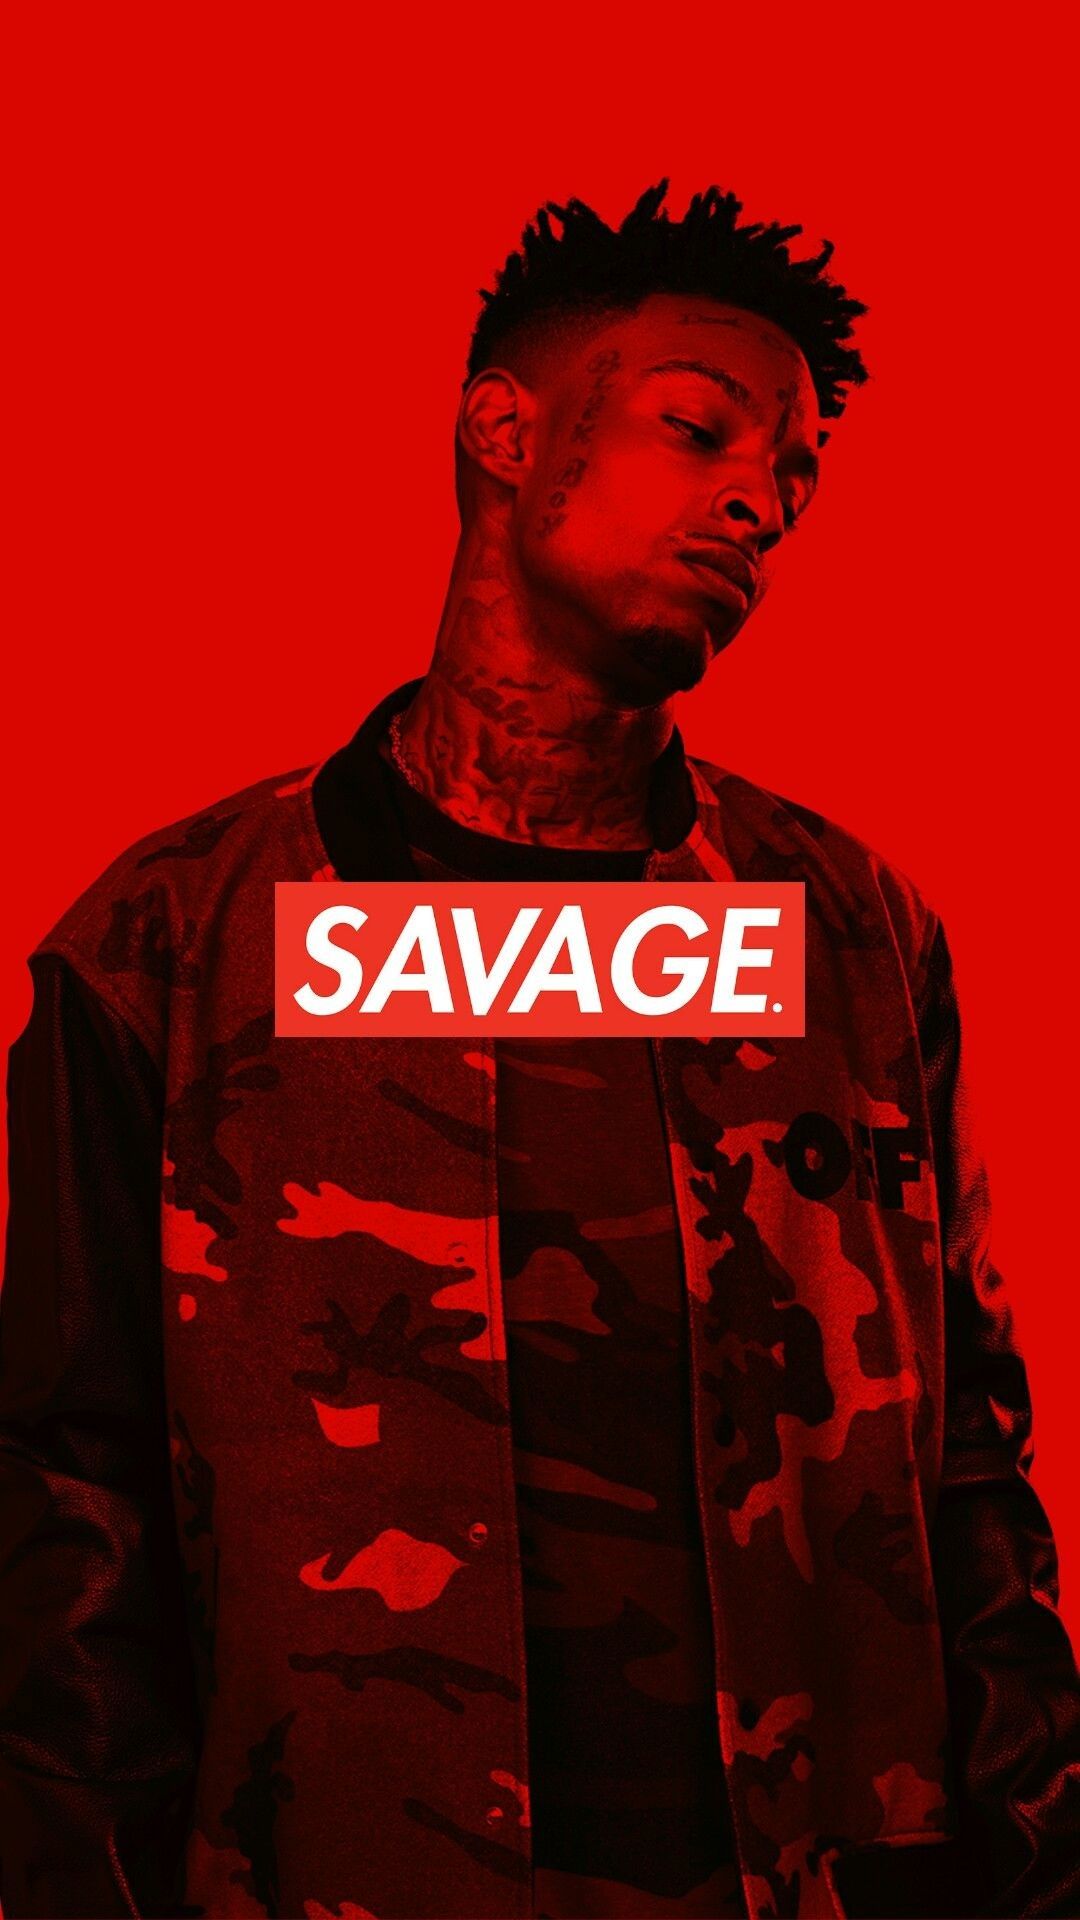 21 Savage Is Wearing Red Shirt And Blue Jeans Walking On Road 21 Savage, HD  wallpaper